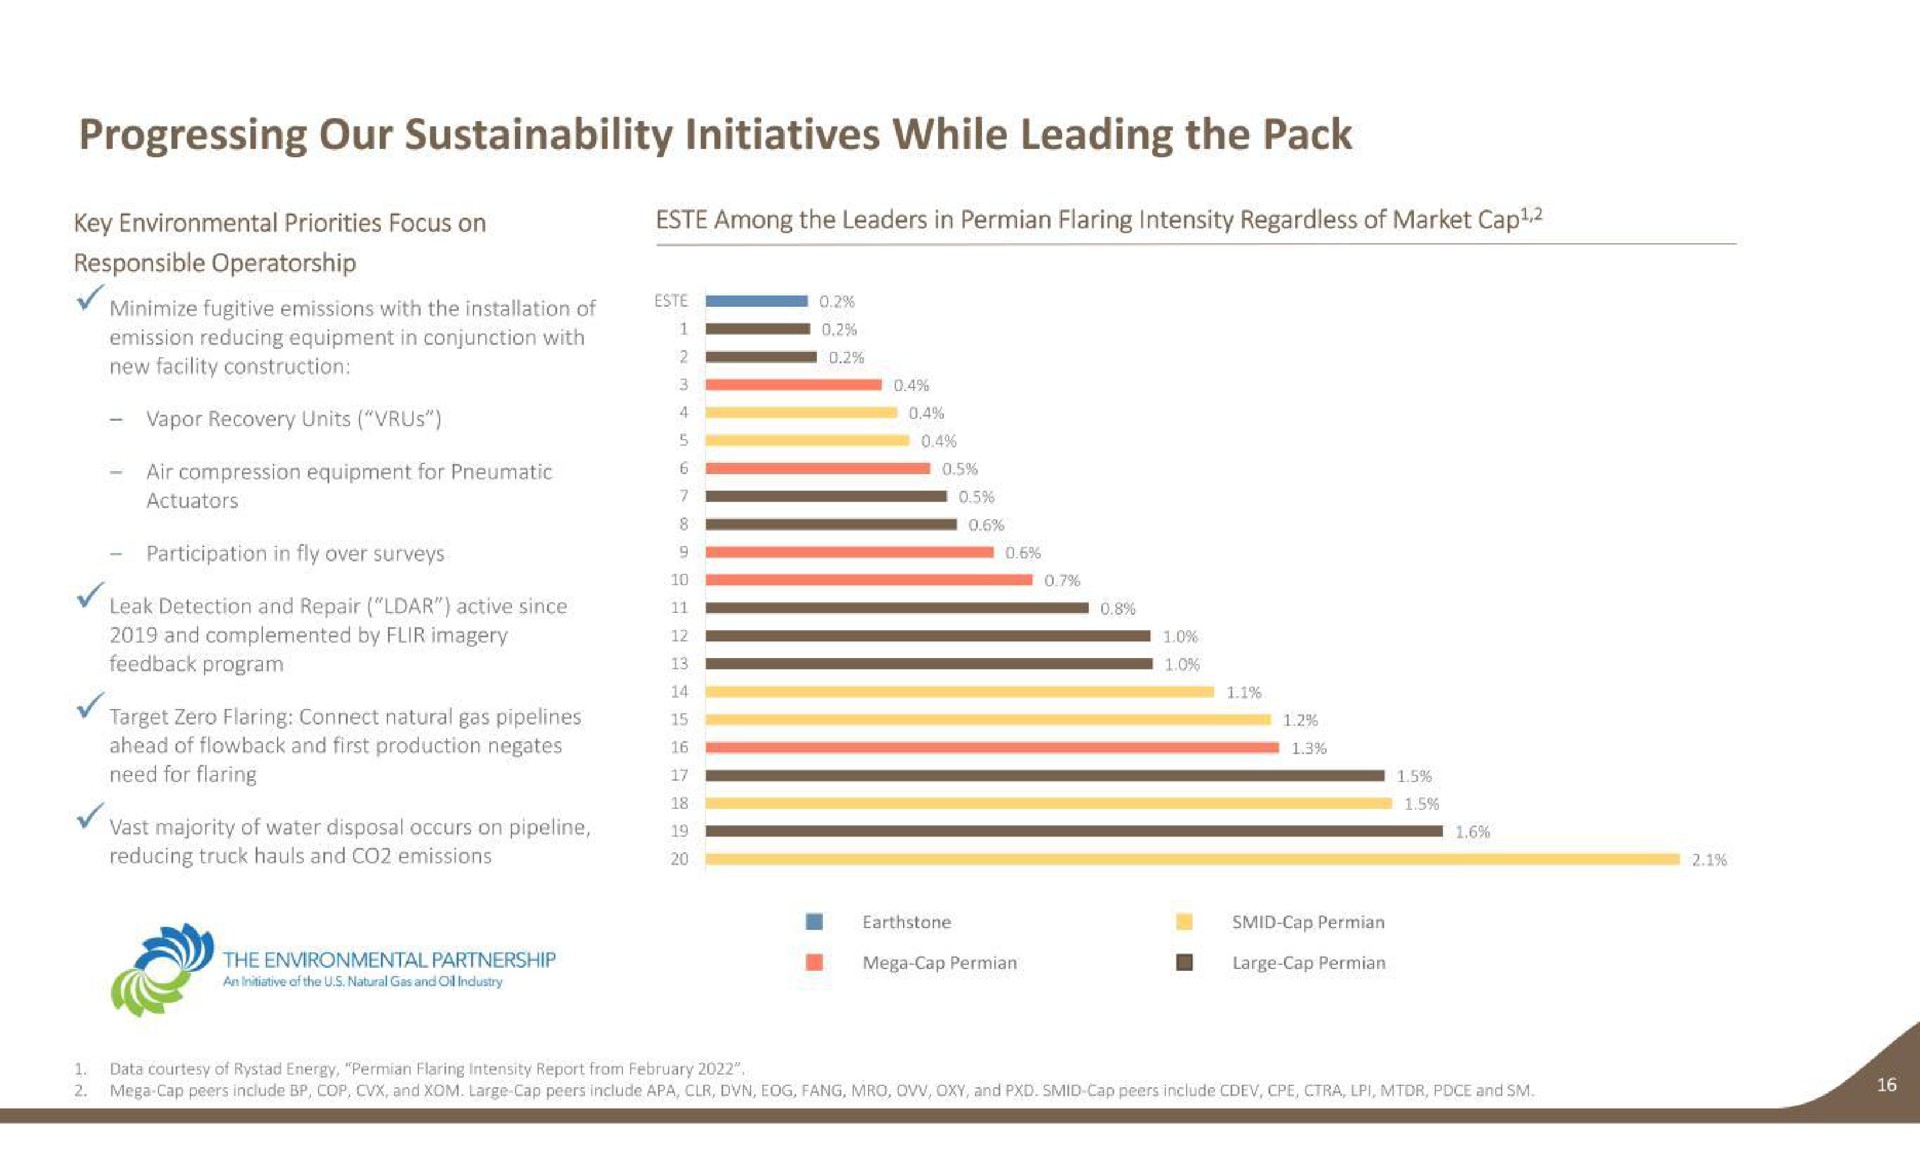 progressing our initiatives while leading the pack key environmental priorities focus on among the leaders in flaring intensity regardless of market cap responsible | Earthstone Energy